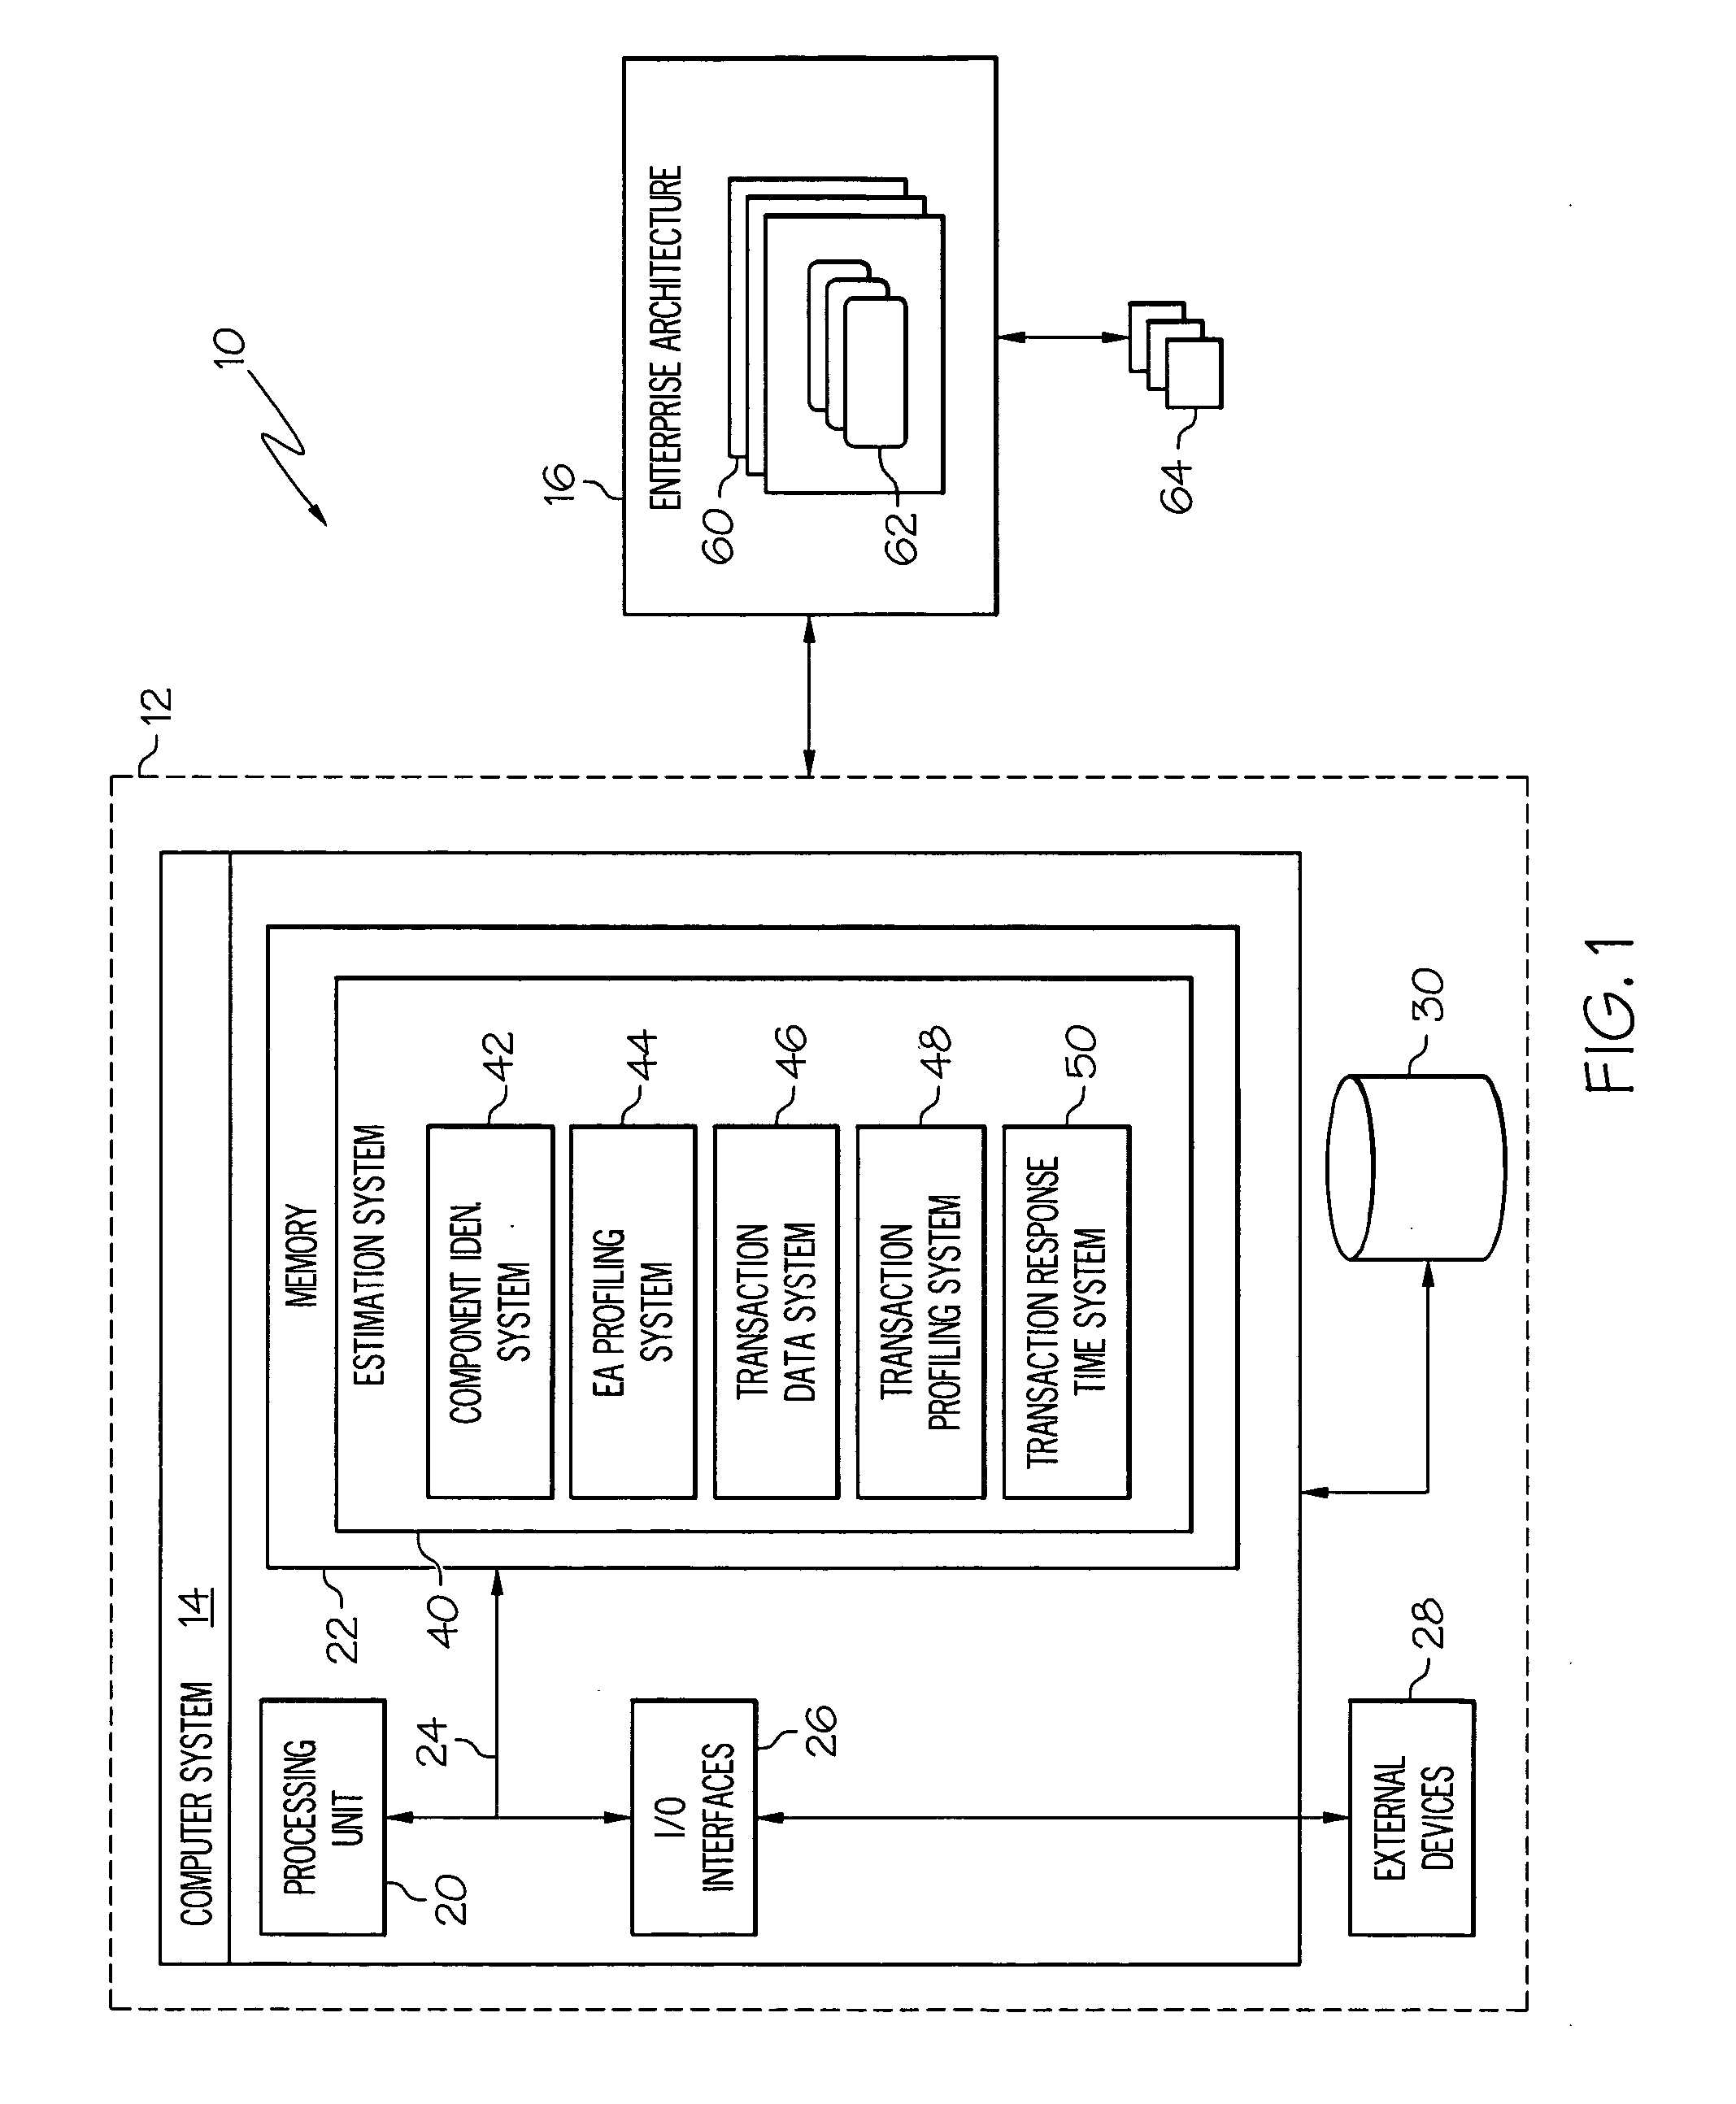 Method, system and program product for estimating transaction response times